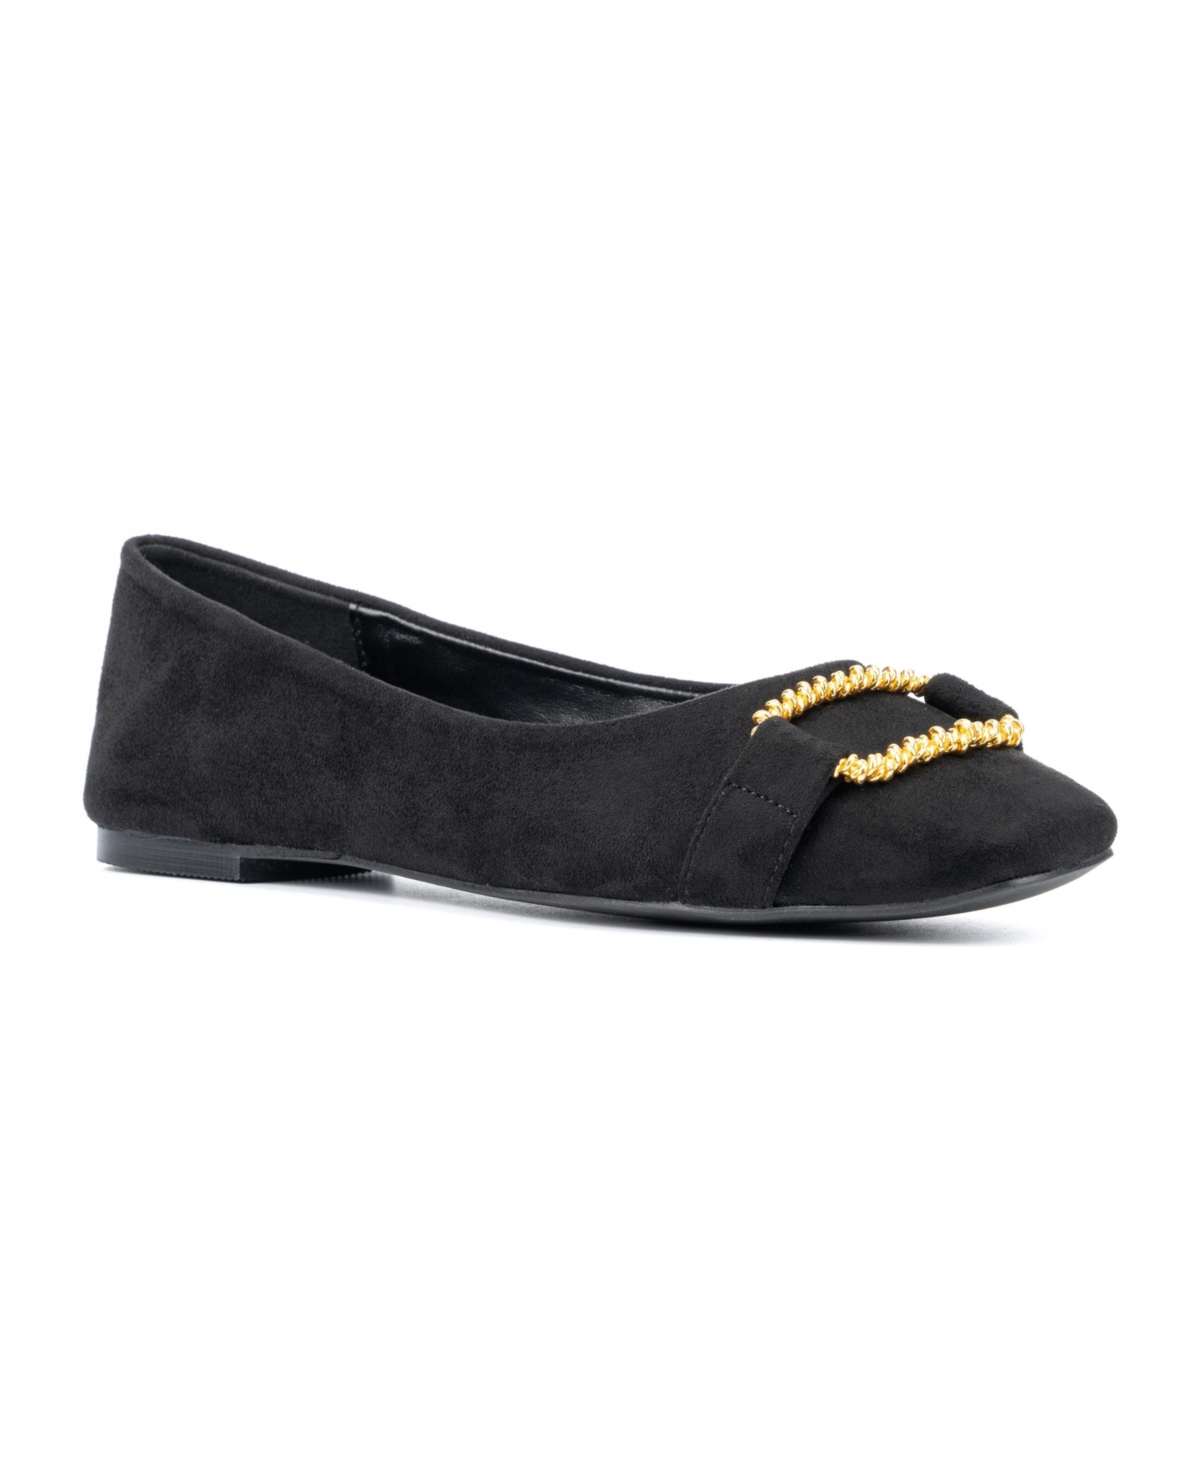 NEW YORK AND COMPANY WOMEN'S NIARA- FLATS WITH GOLD HARDWARE ACCENT